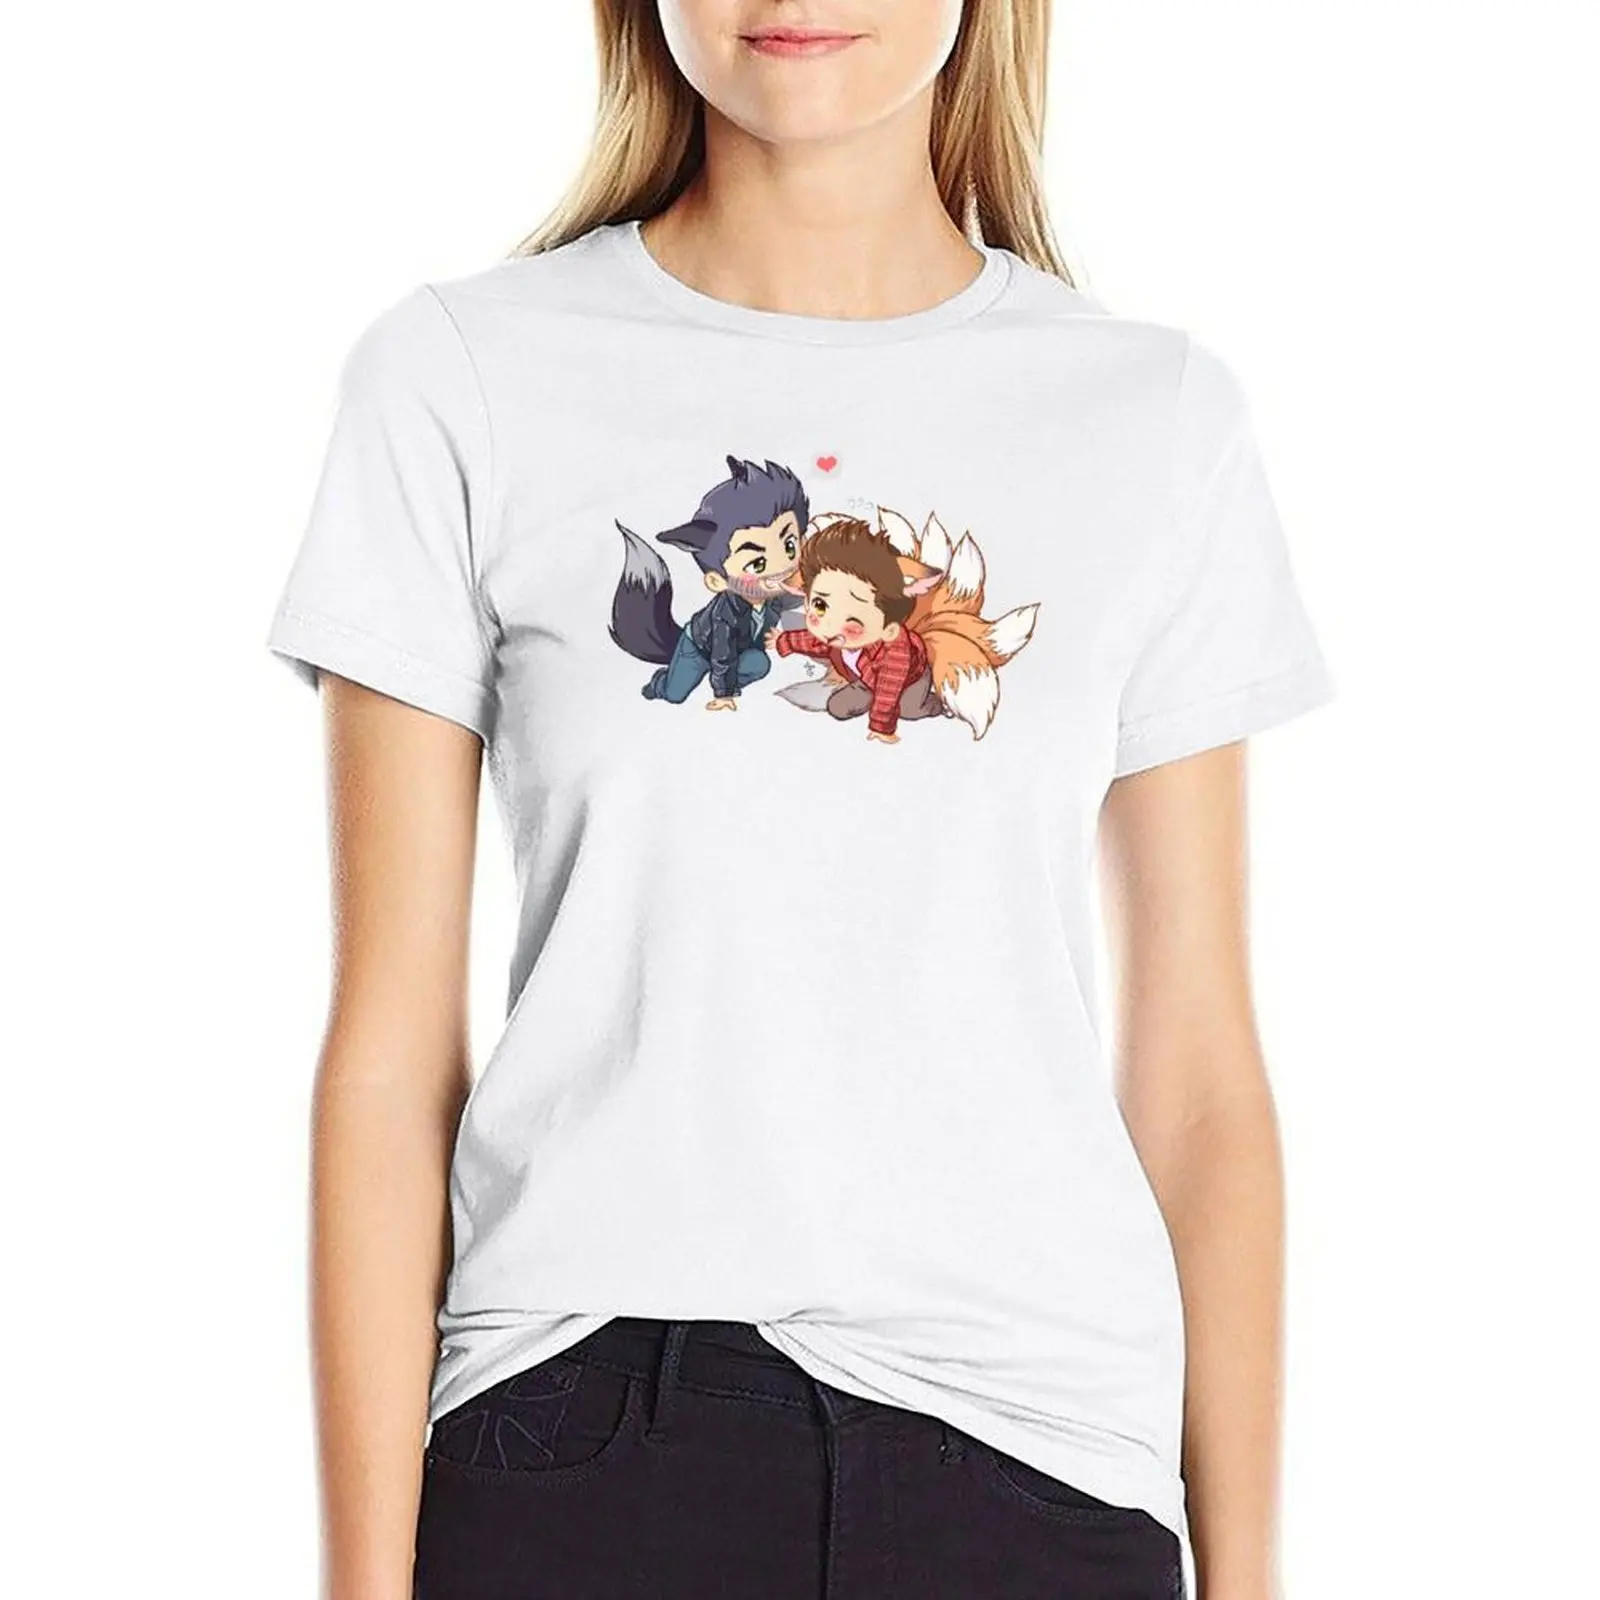 

The Fox 'n the Wolf - Part 2 T-shirt anime clothes summer tops t-shirt dress for Women plus size sexy